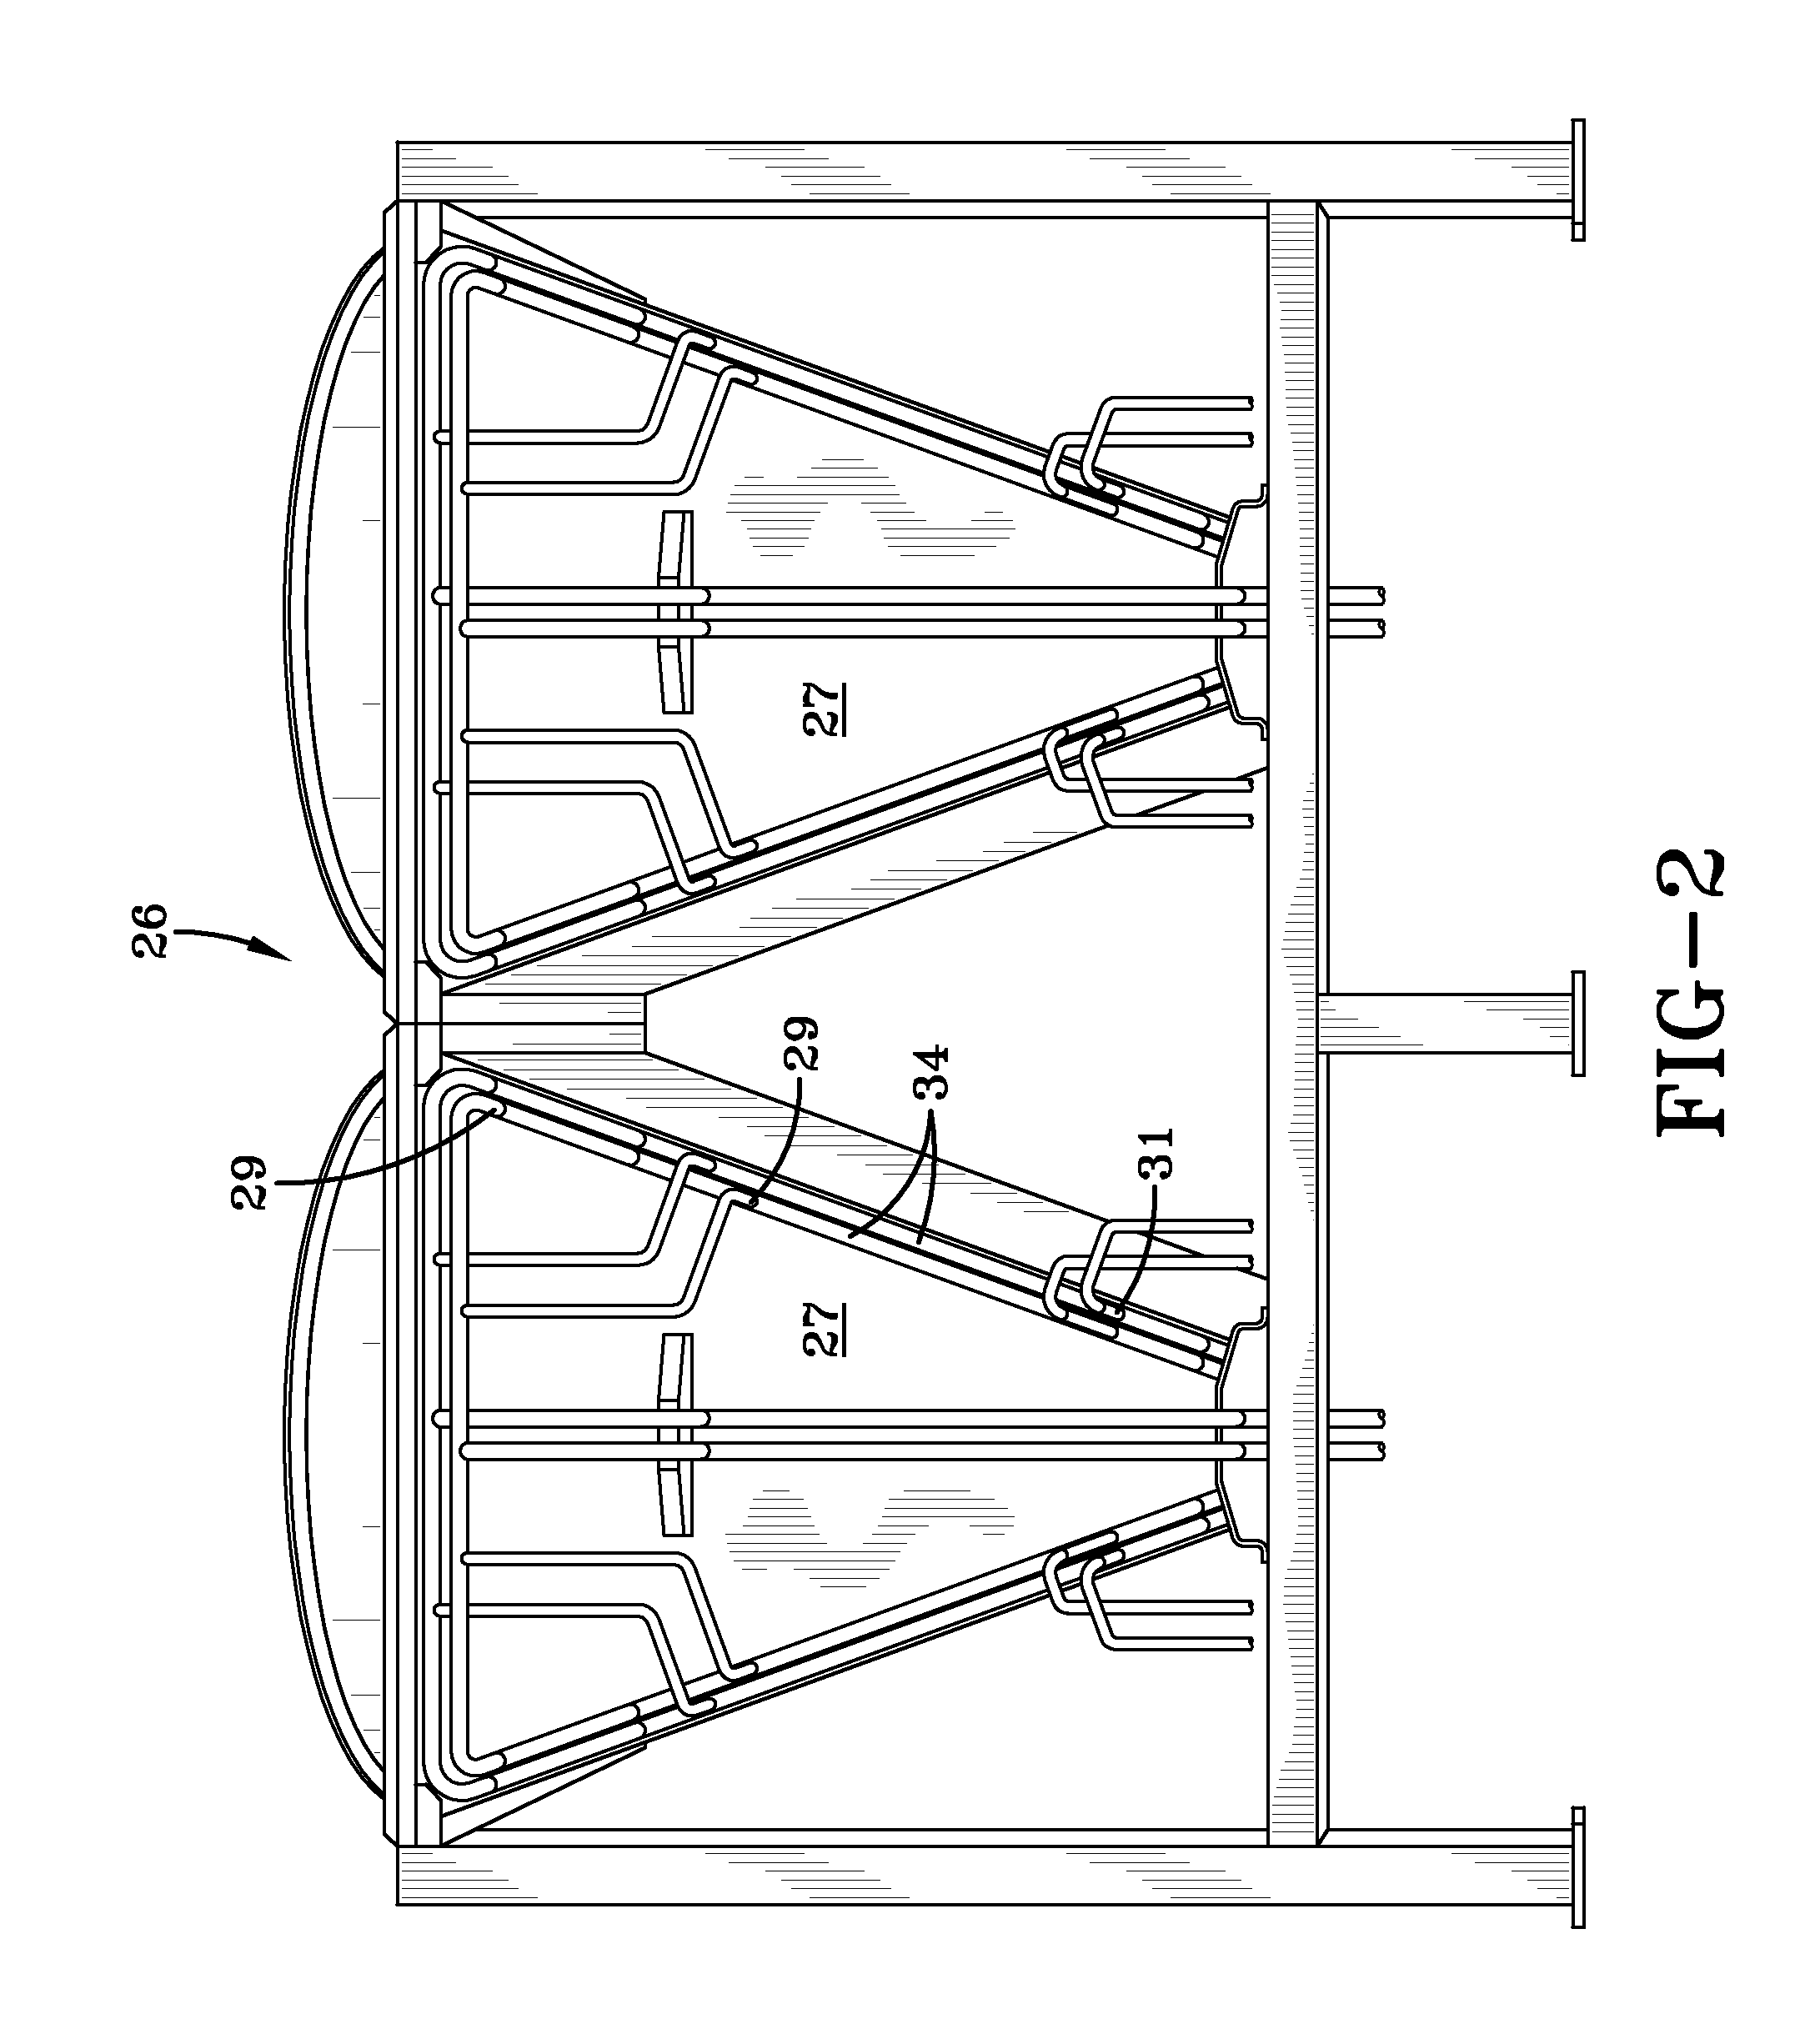 Heat exchanger having stacked coil sections